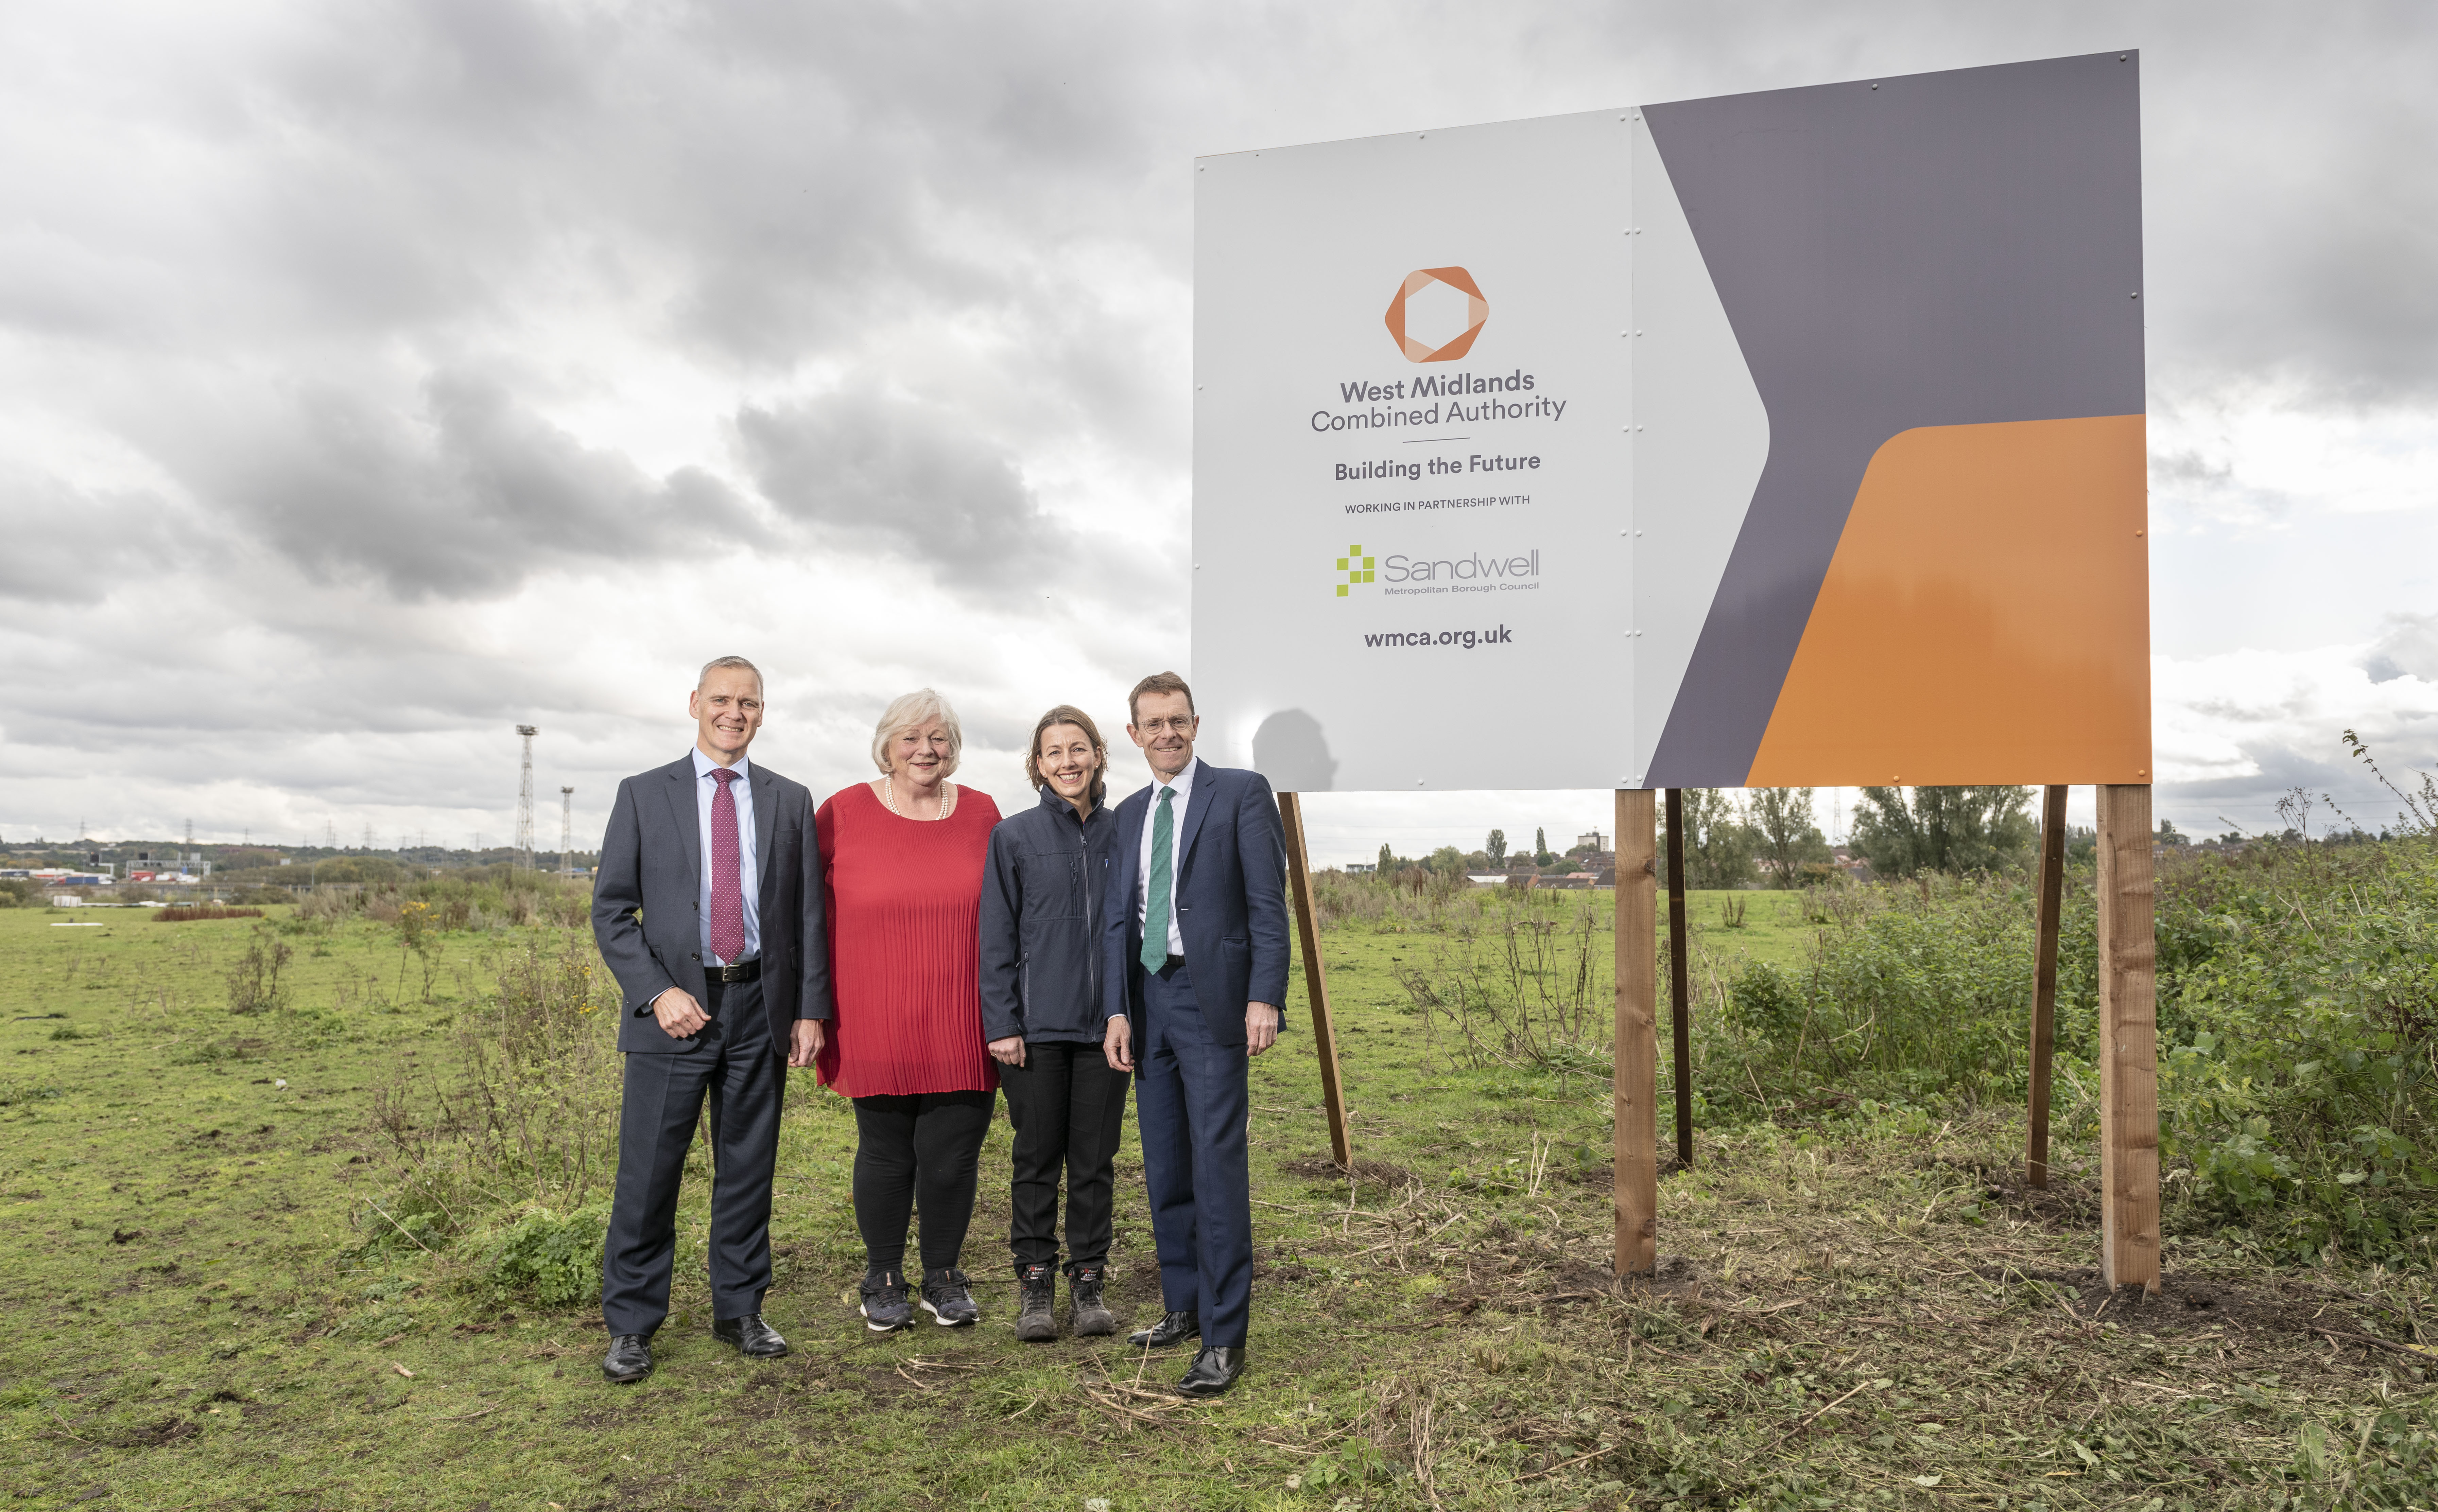 David Warburton WMCA head of land and development, Cllr Yvonne Davies Sandwell Council leader, Julie Rossiter head of property development for Severn Trent and Andy Street Mayor of the West Midlands, at the Friar Park site